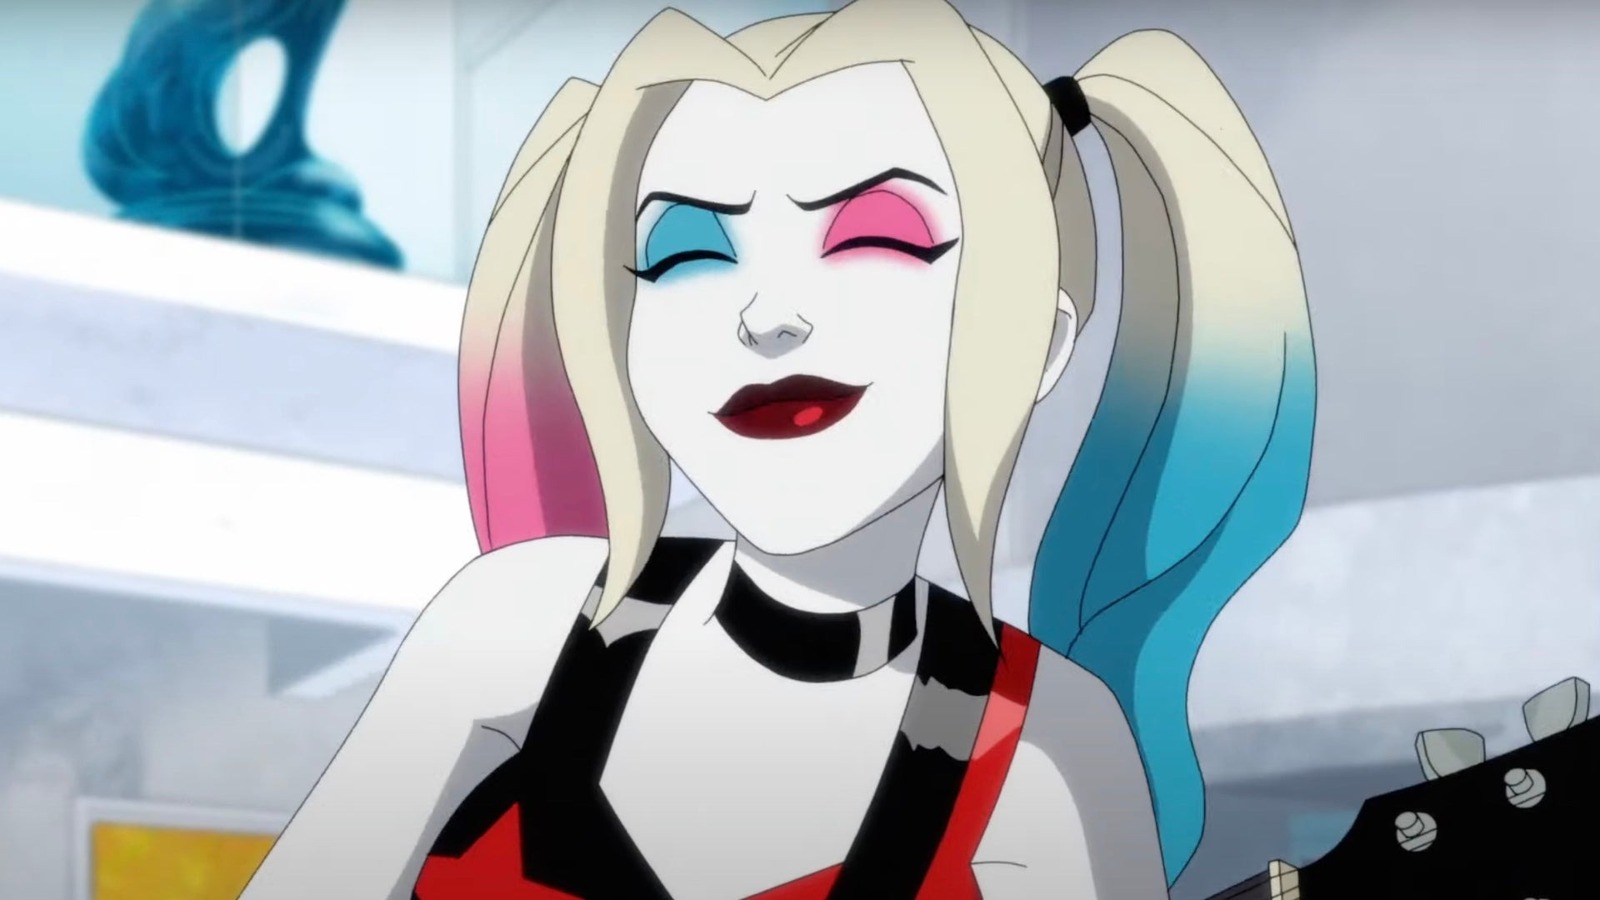 doug watson recommends harley quinn feet story pic